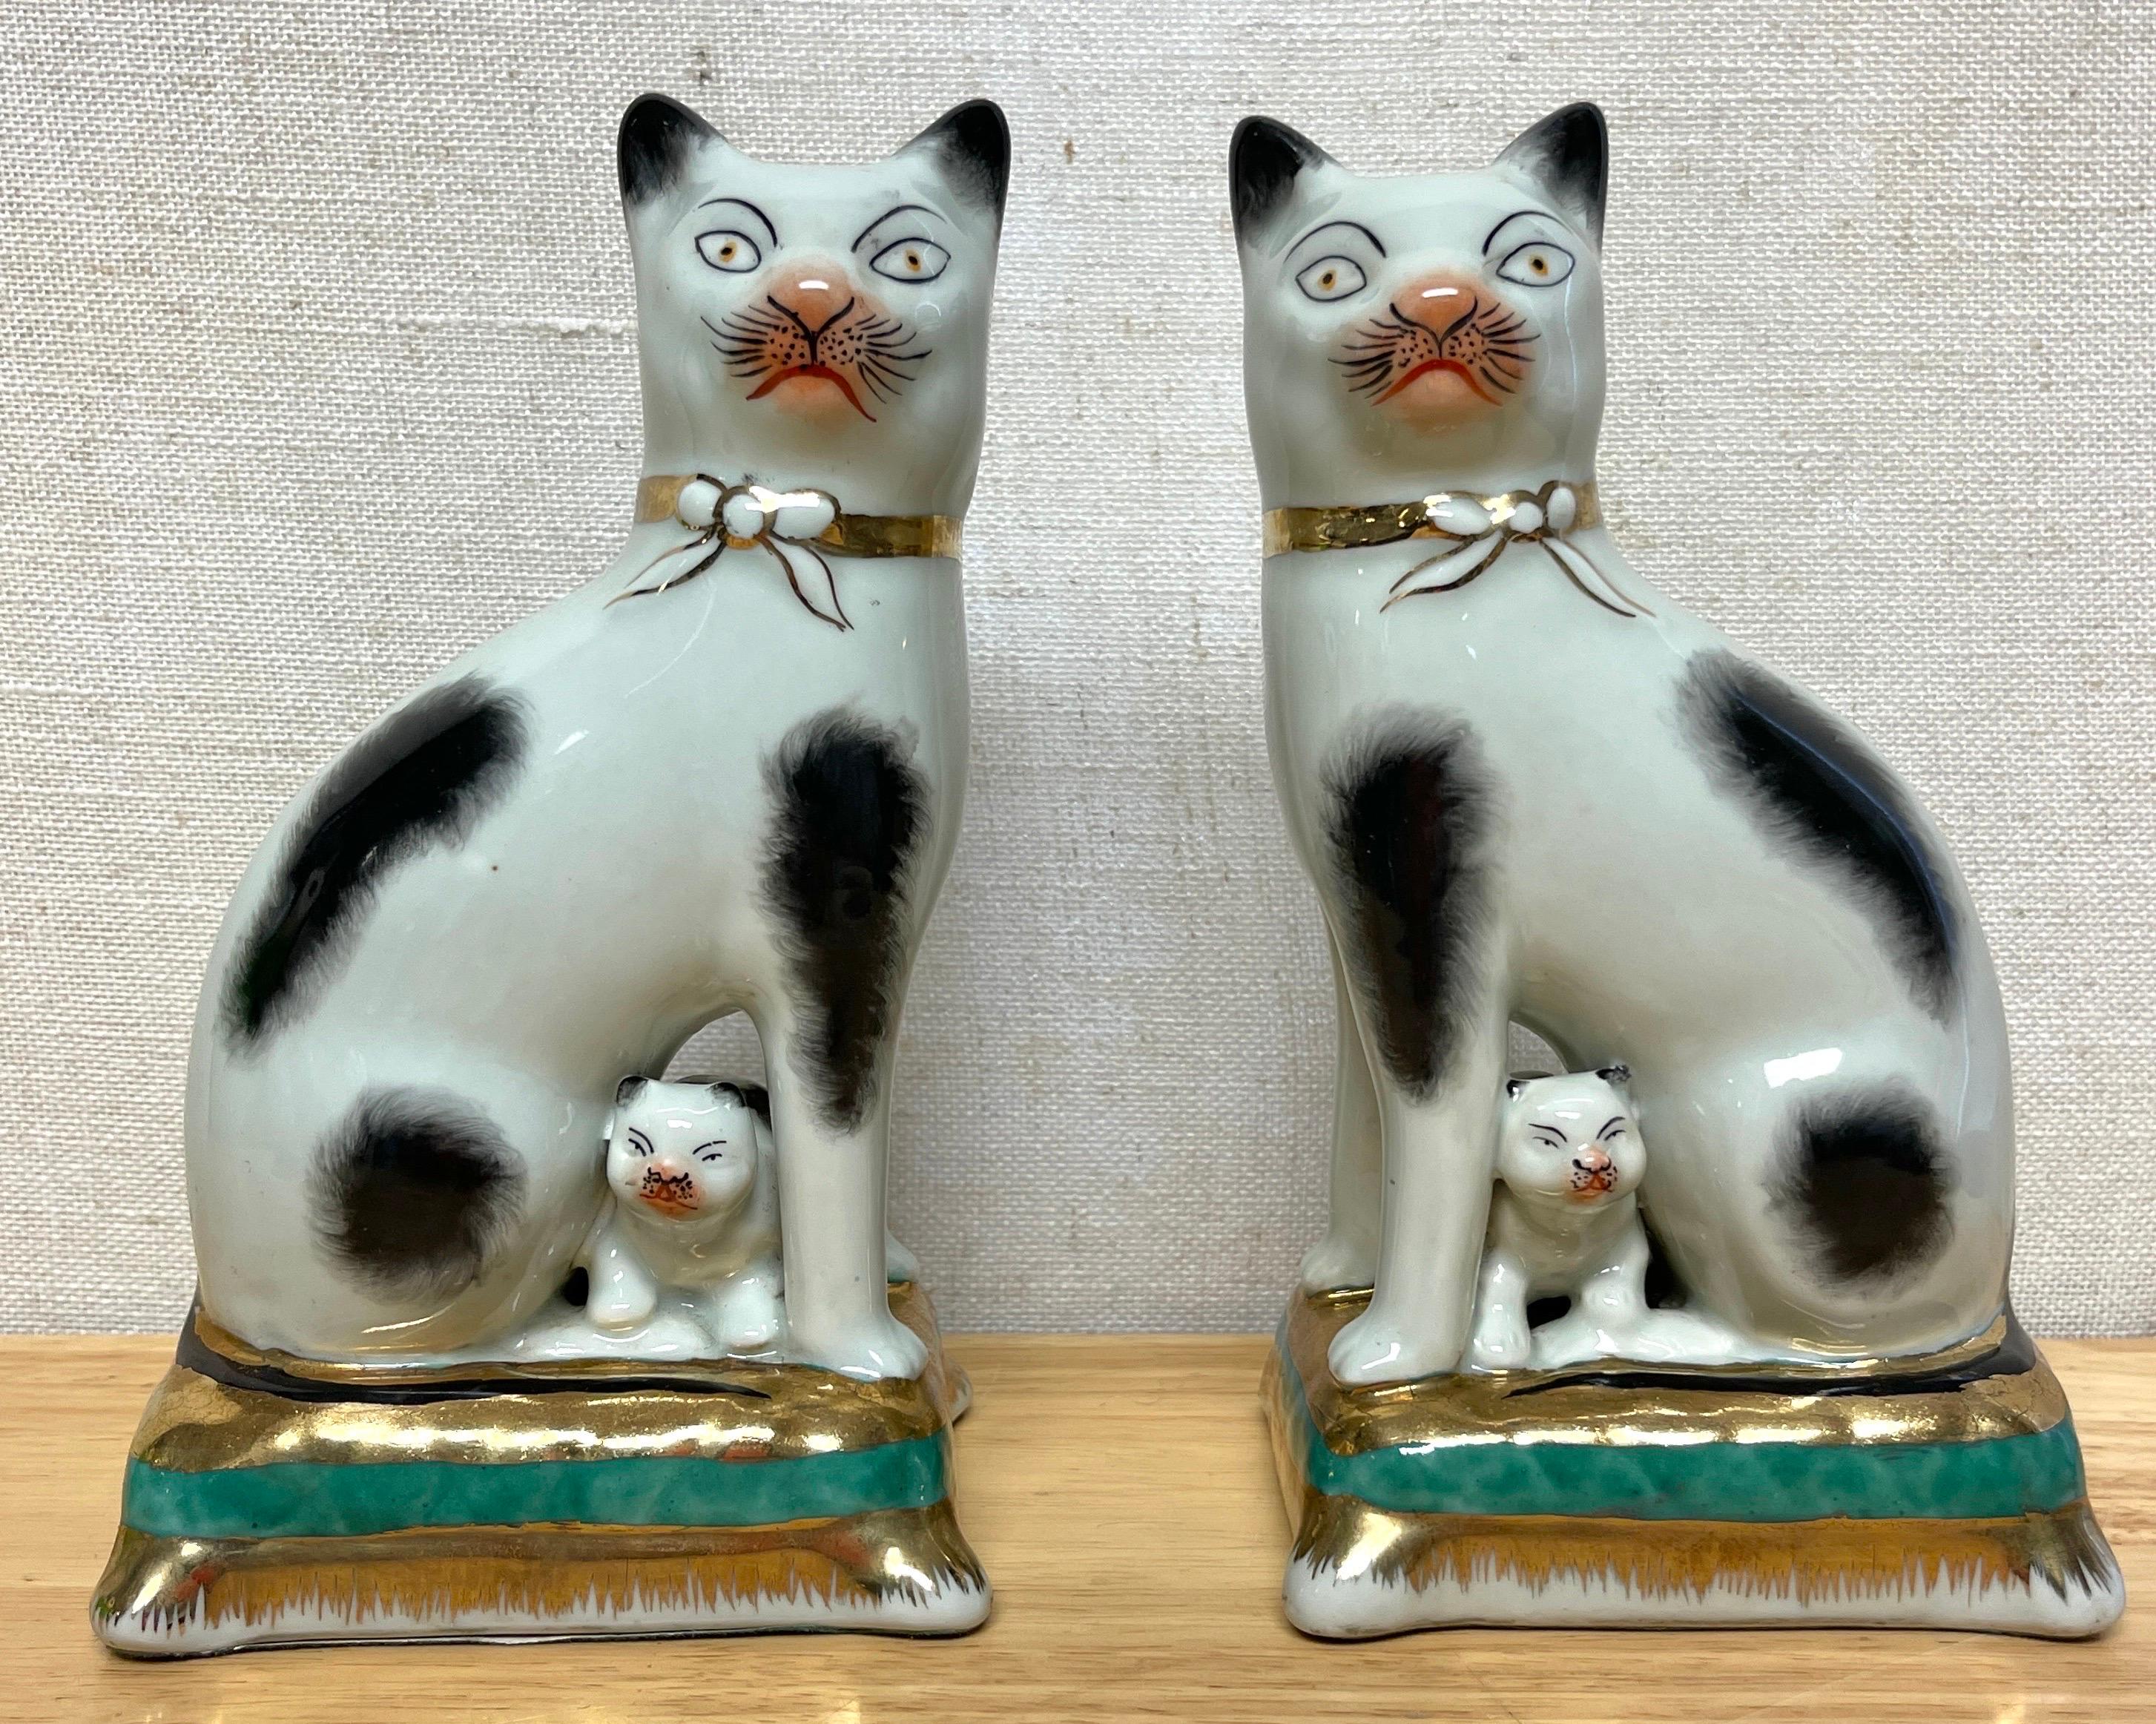 Pair of Staffordshire Figures of Seated Black & White Cats with Kittens 
England, 20th Century 

Rare examples, Each one a well painted feline with expressive faces, with kittens in between their legs, seated on gilt green tasseled cushions.